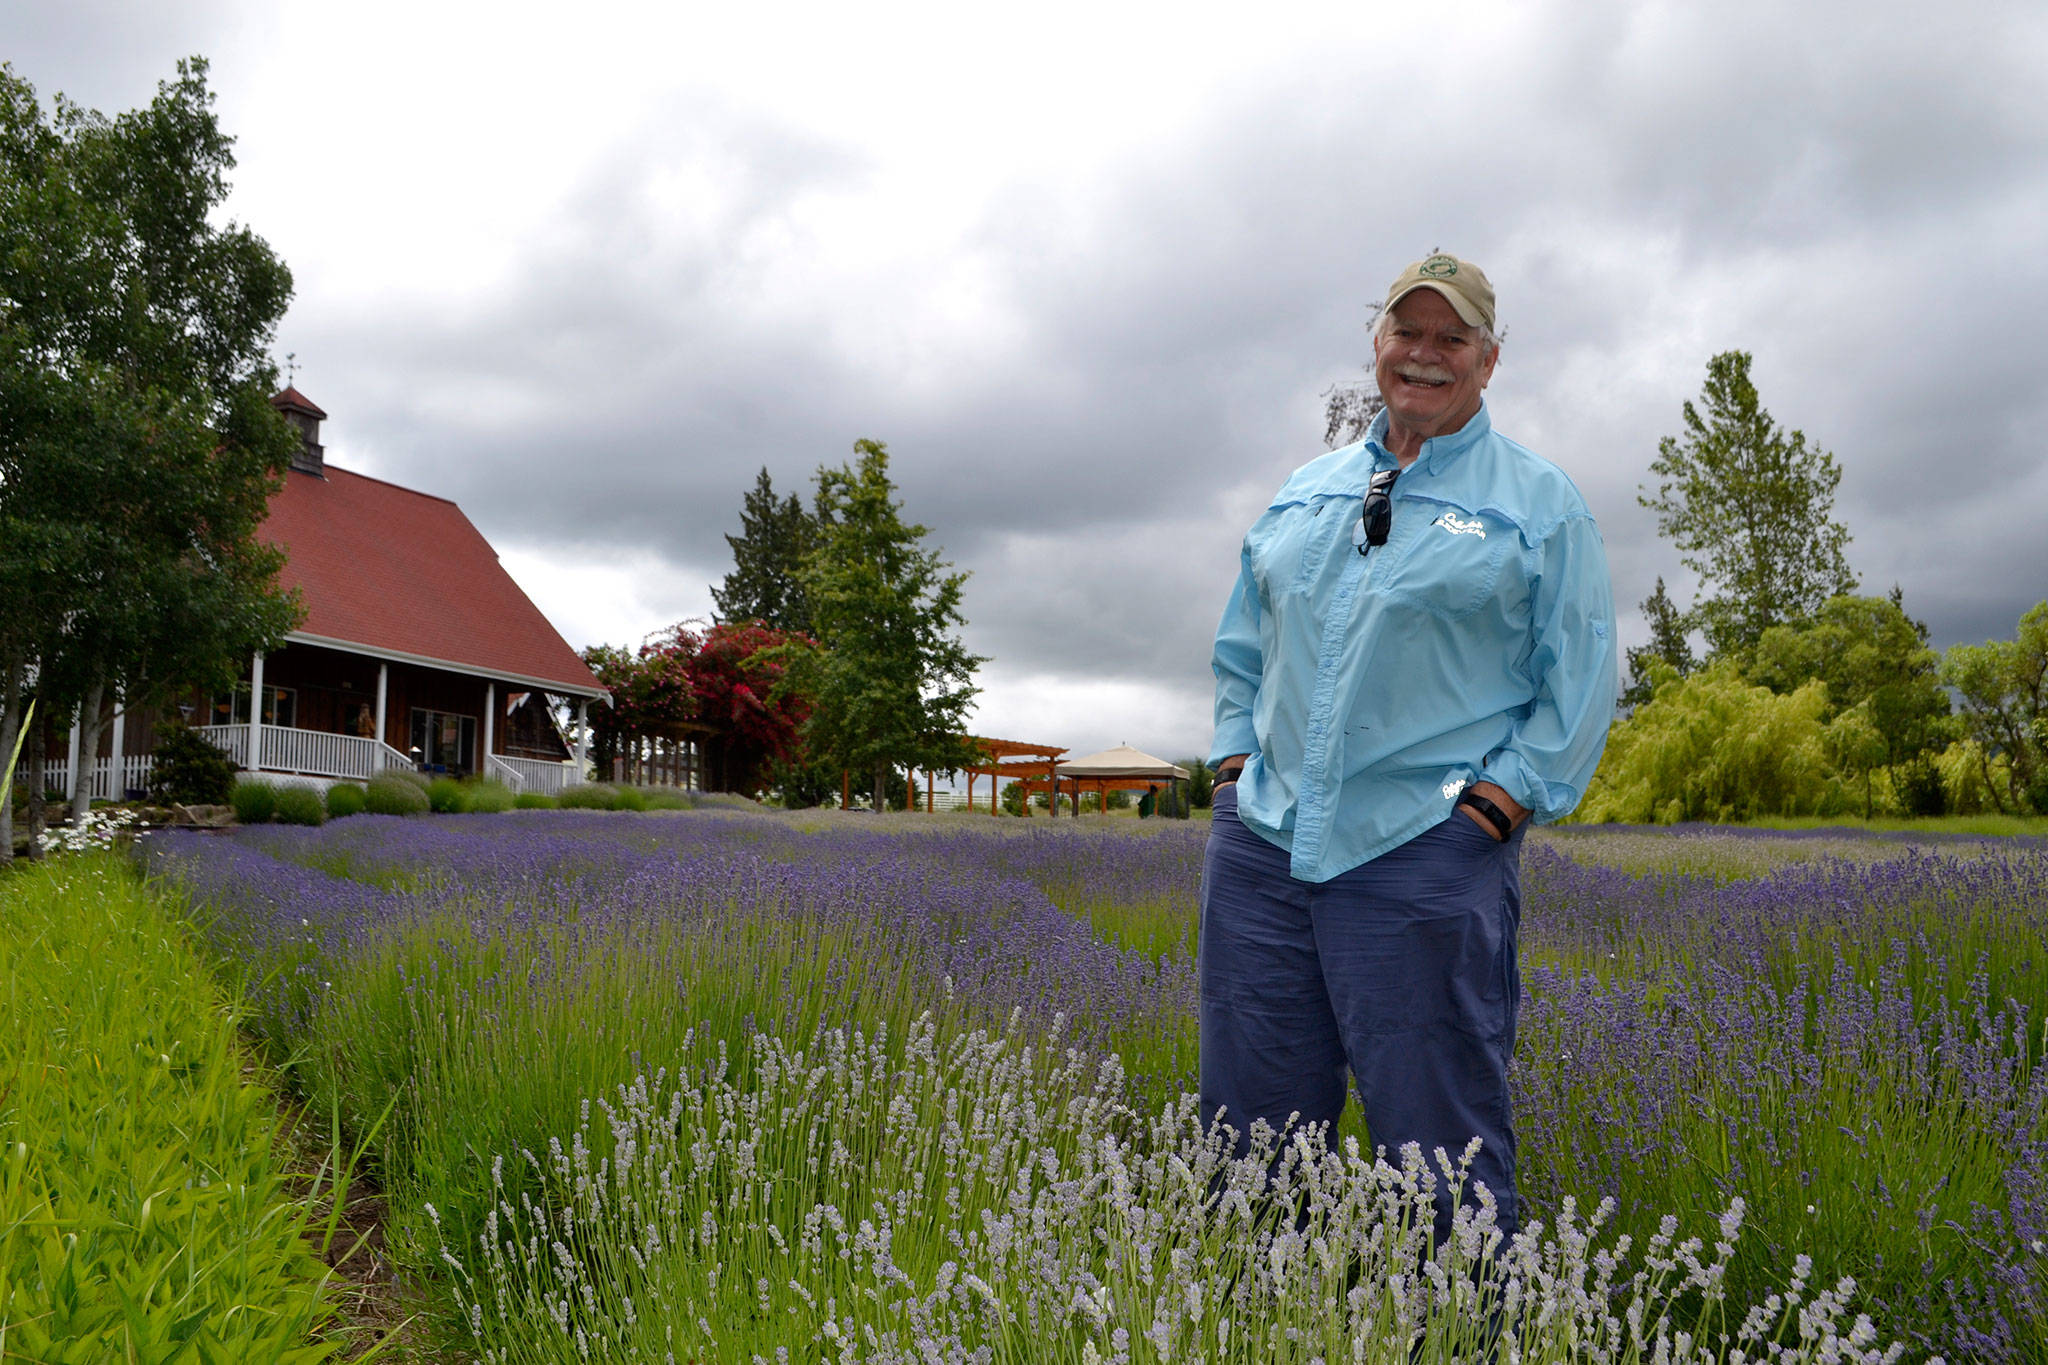 Mike Reichner, owner of Purple Haze Lavender, said he’s selling the farm because he’s ready to retire and travel more. He’s entering his 22nd season and feels lavender has helped add to the agricultural persona of Sequim. (Matthew Nash/Olympic Peninsula News Group)